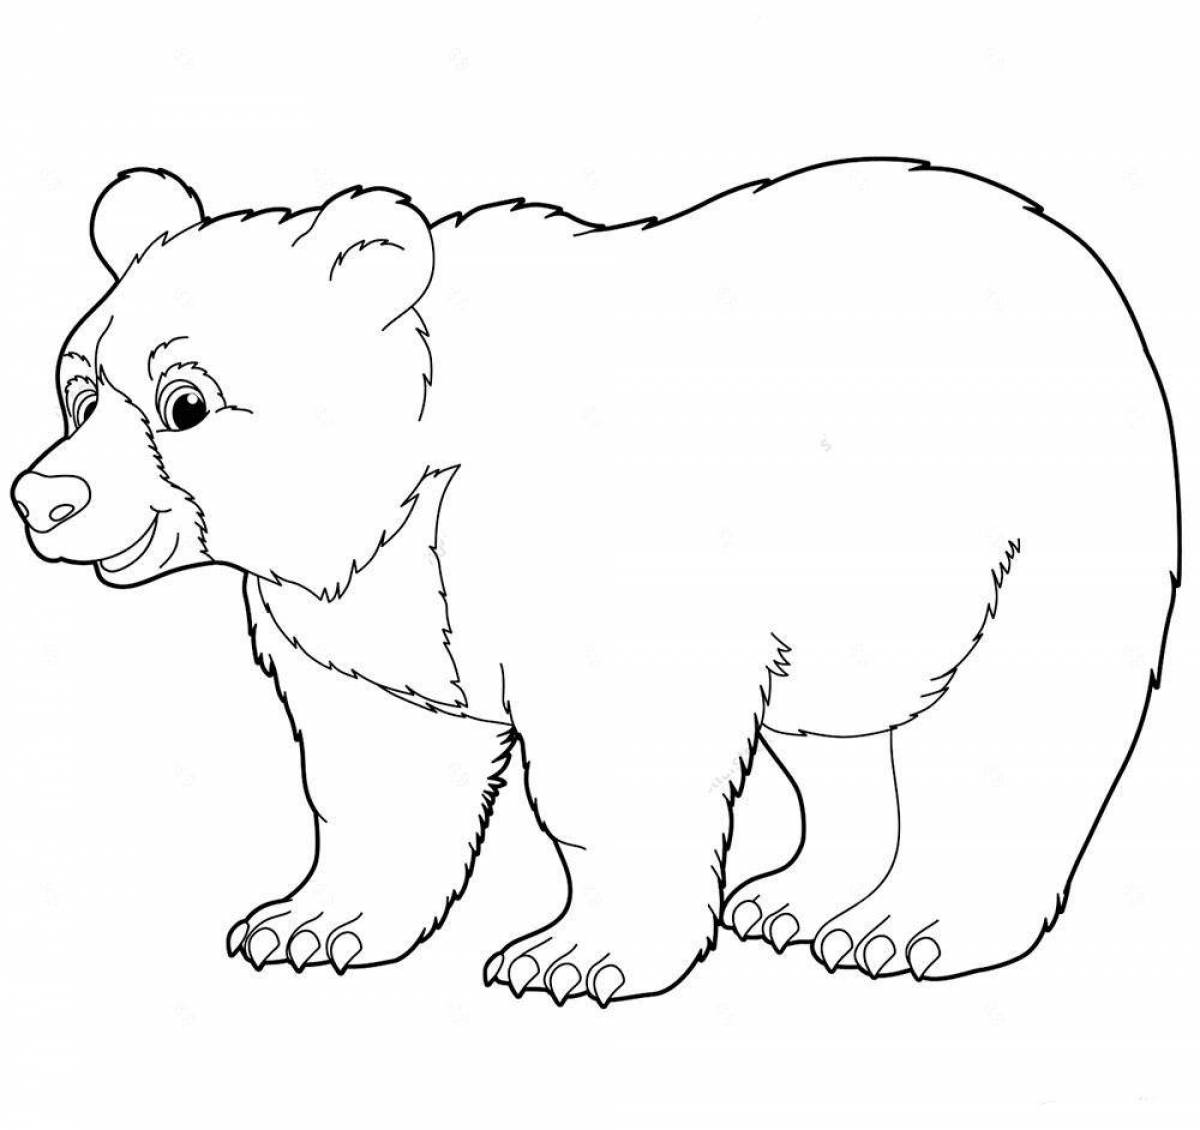 Lucky bear coloring book for 4-5 year olds